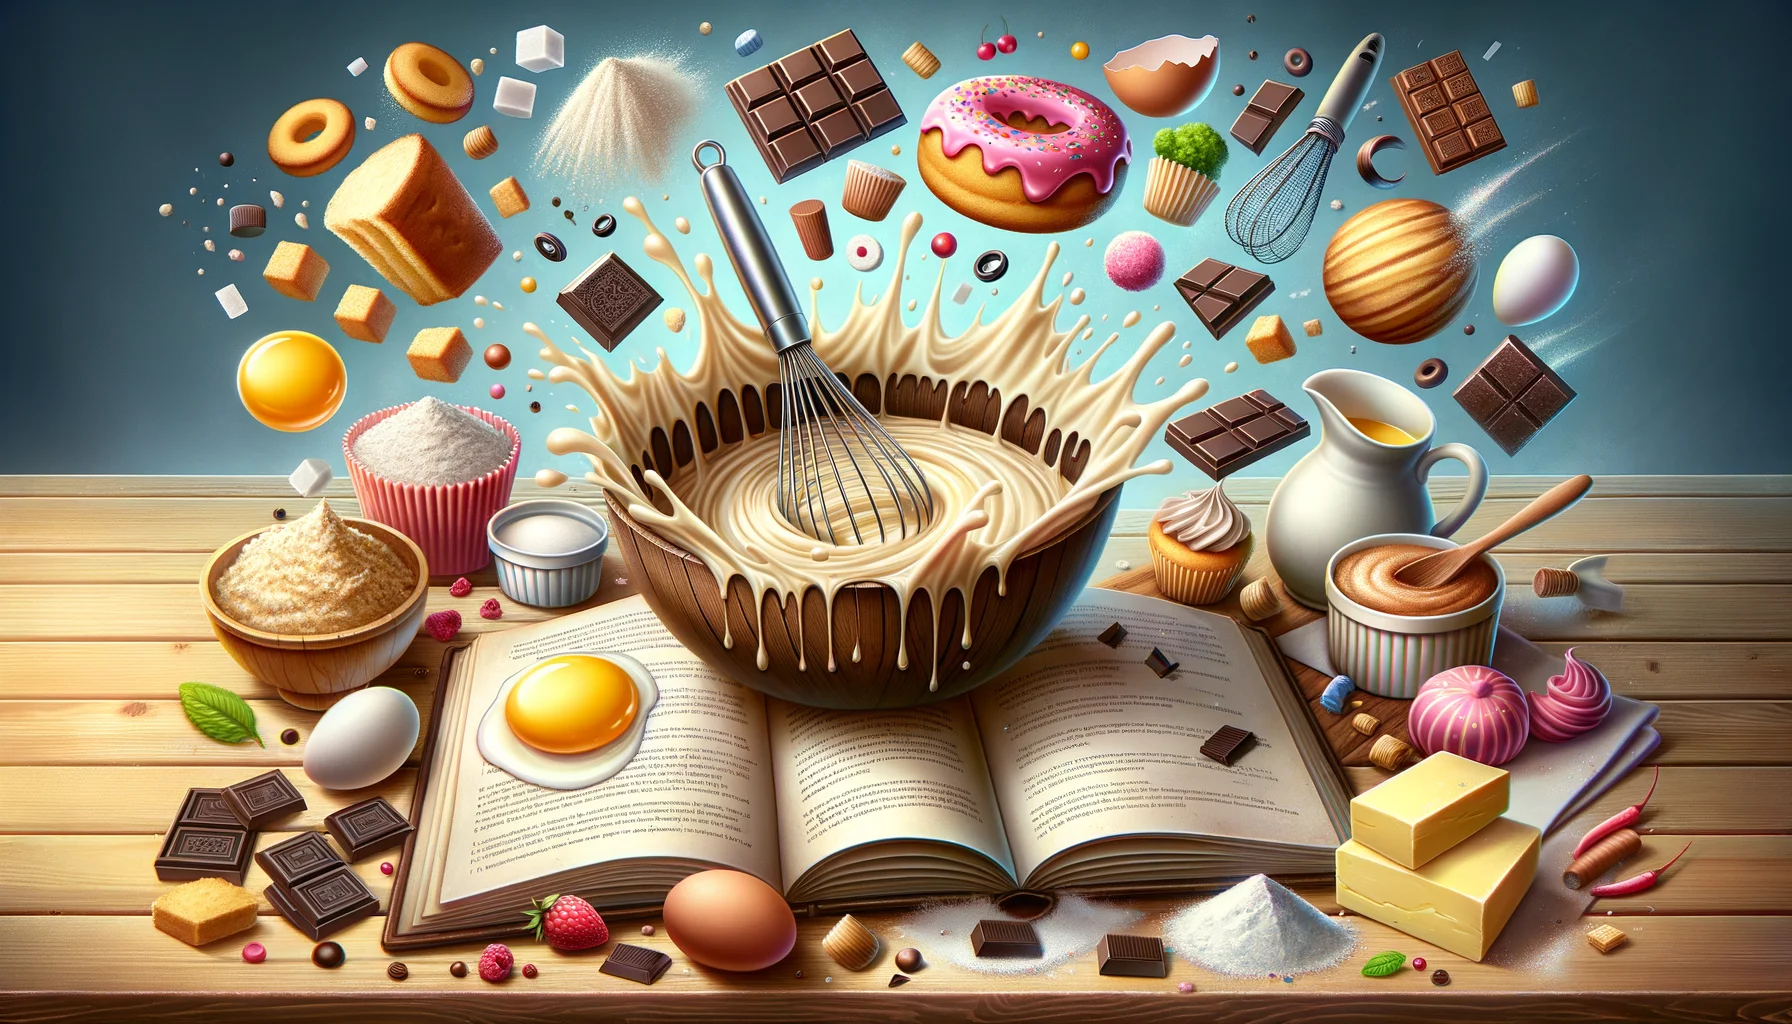 Create an image showcasing a humorous scene in a kitchen. Place an assortment of dessert ingredients such as flour, sugar, eggs, butter, and chocolate spread out on a wooden countertop. Include a few opened recipe books with ingredients spilling out of them. A whisk should be seen spinning on its own in a bowl full of cake batter, creating a fun, chaotic environment. Everything is detailed, brightly colored, and realistic.